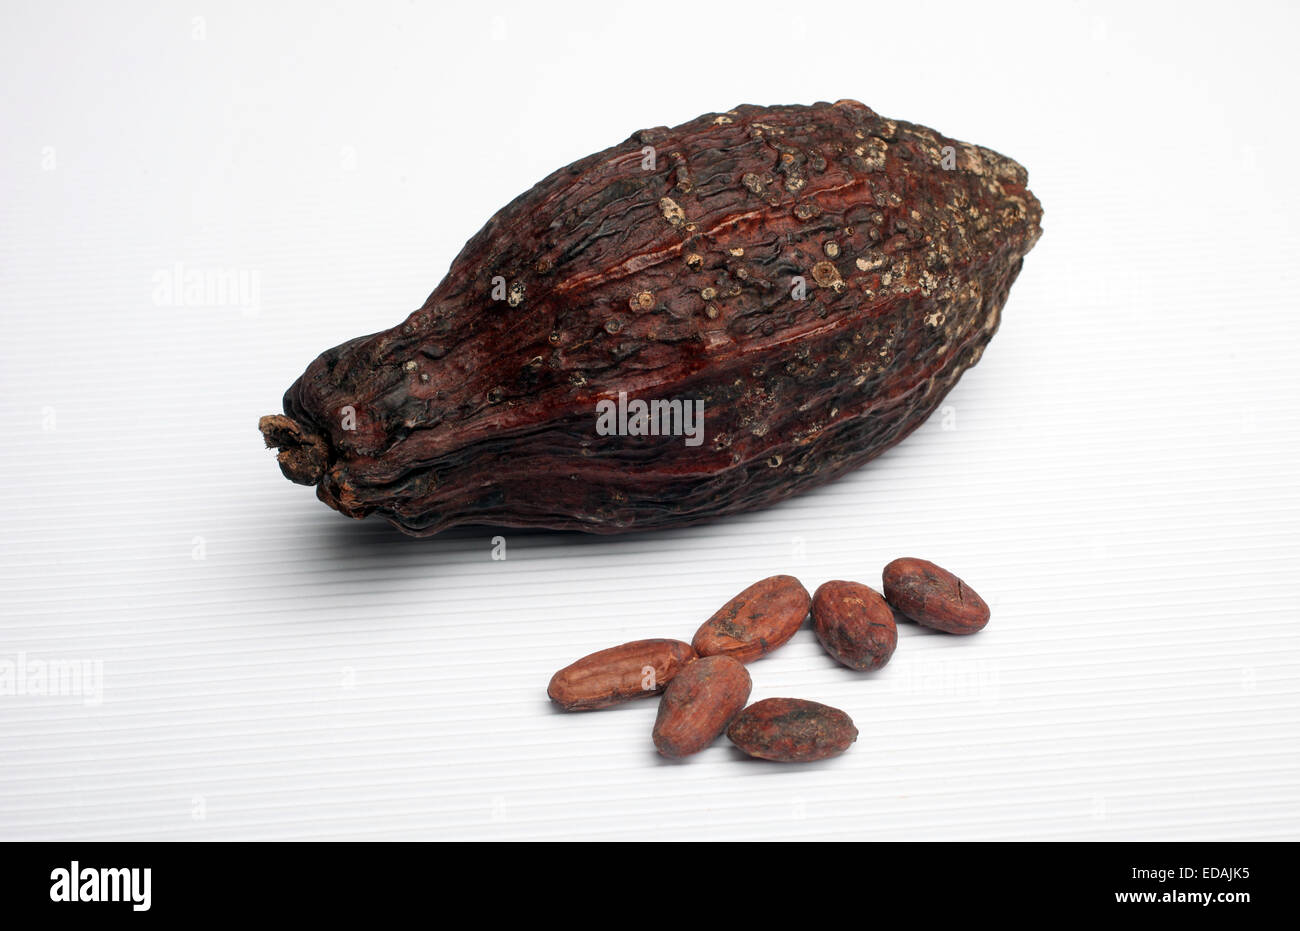 Cocoa pods and beans Stock Photo